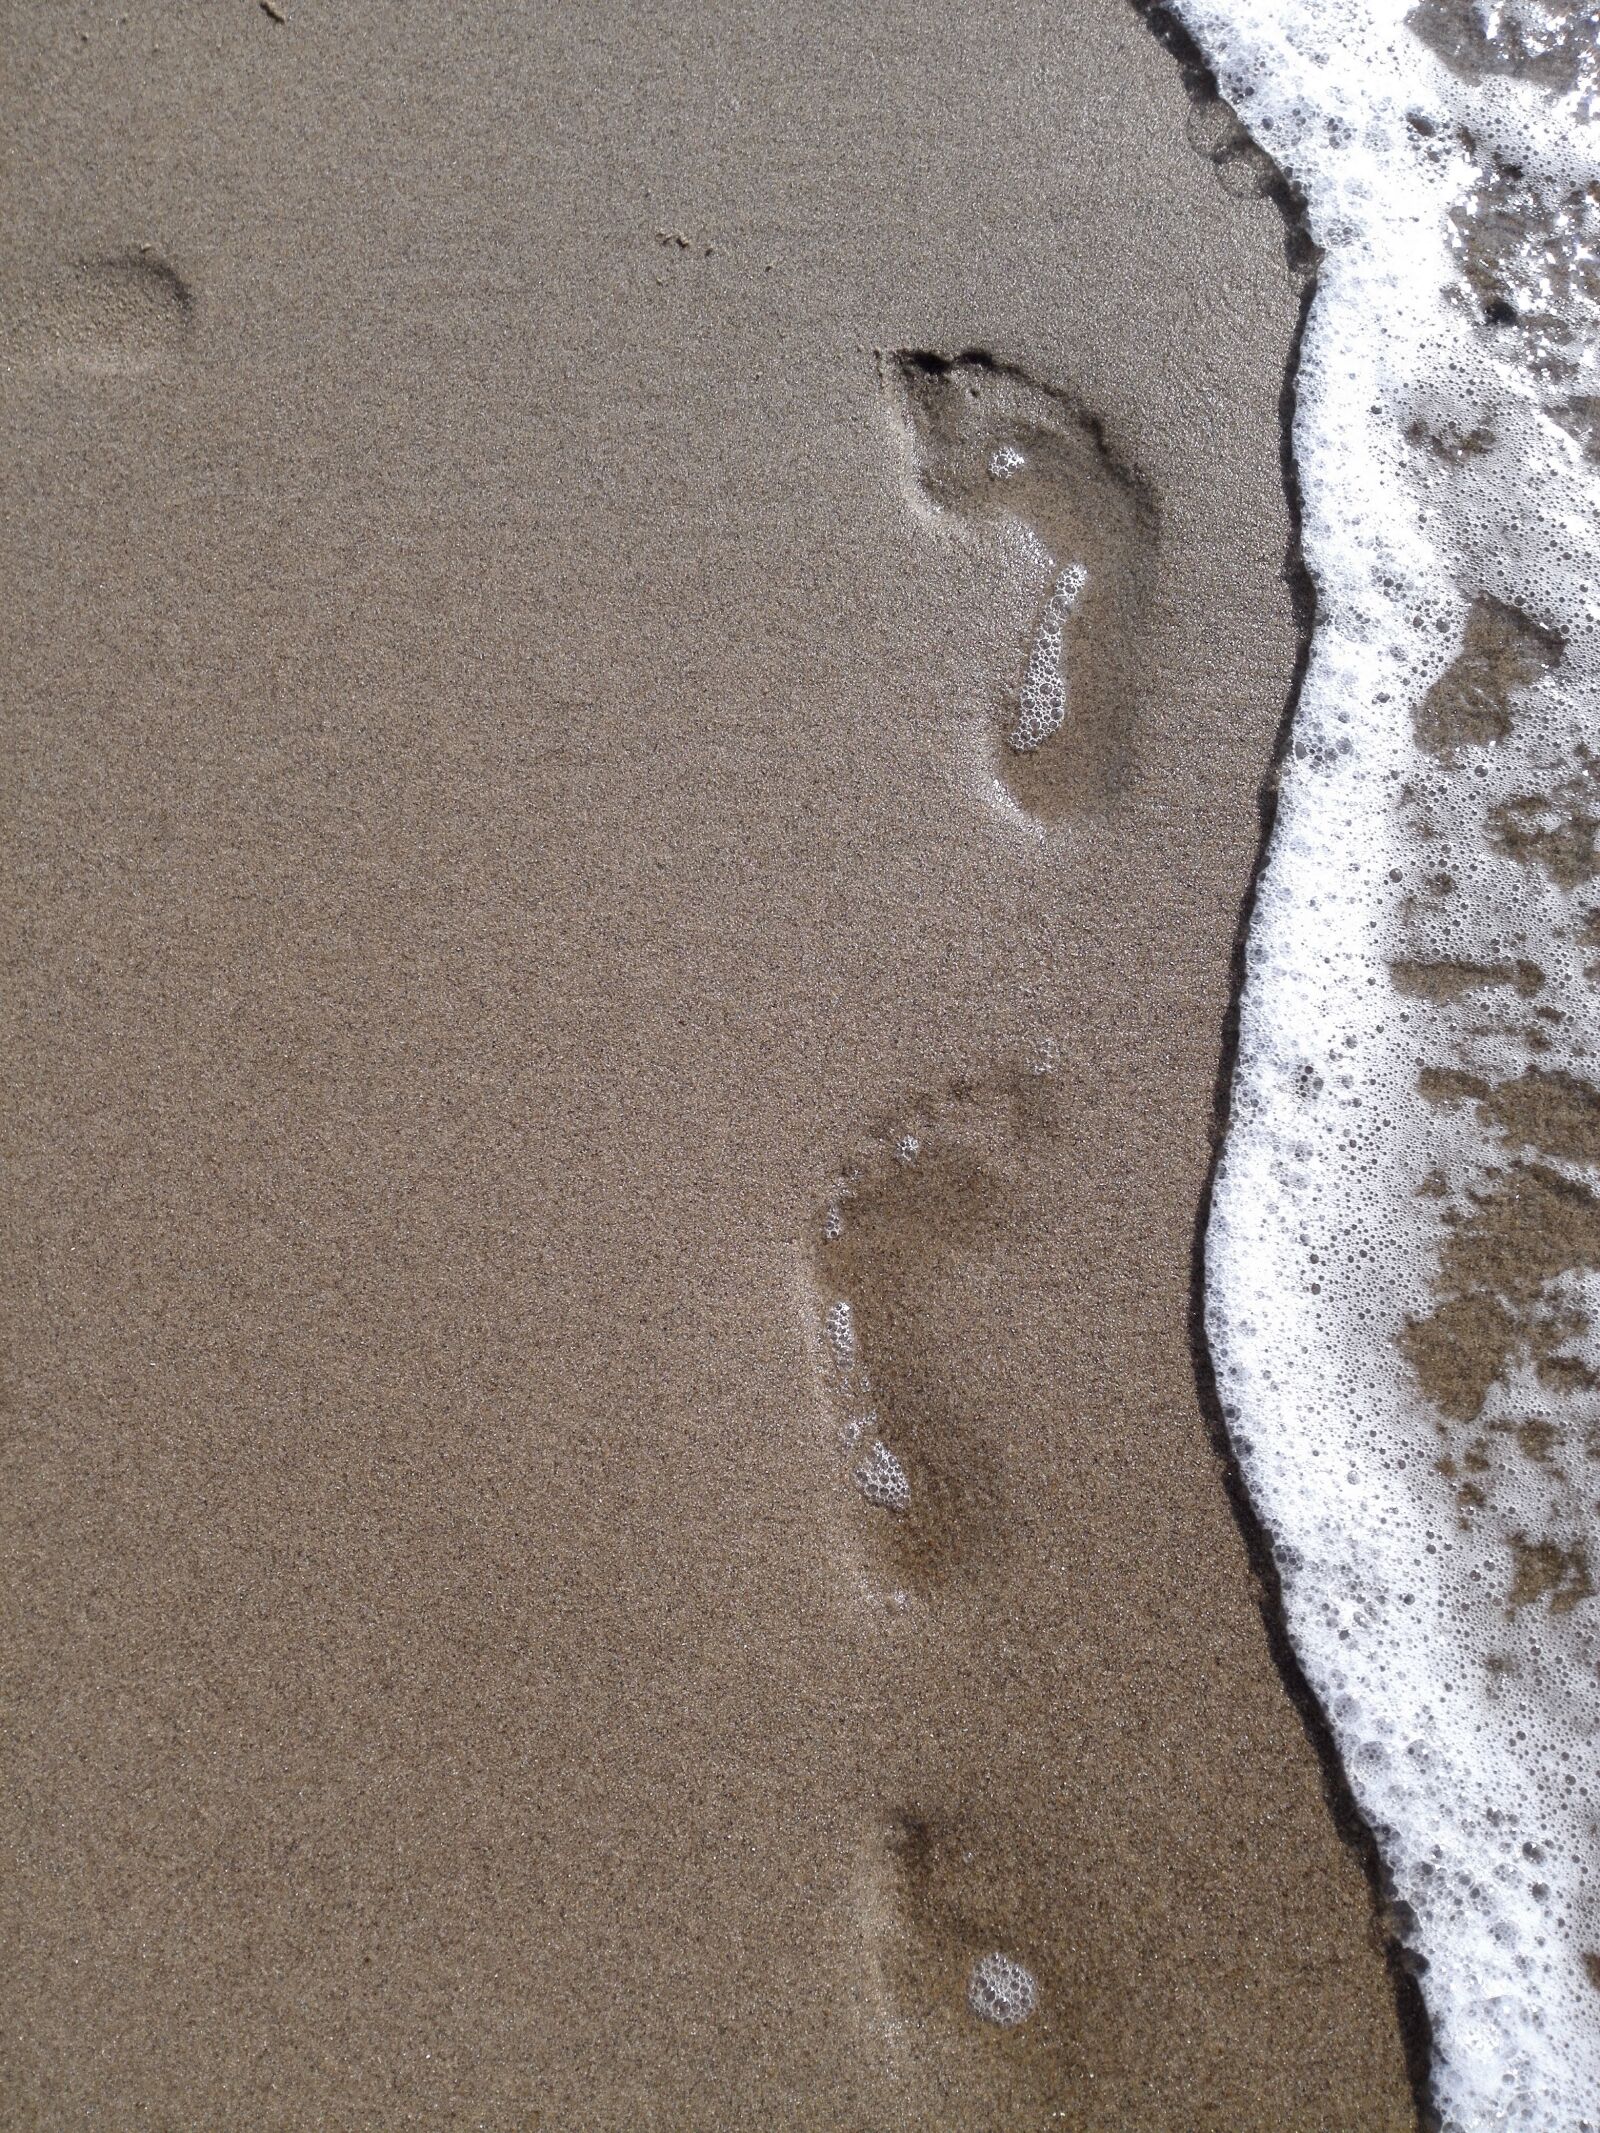 HUAWEI Mate 7 sample photo. Beach, traces, sand photography